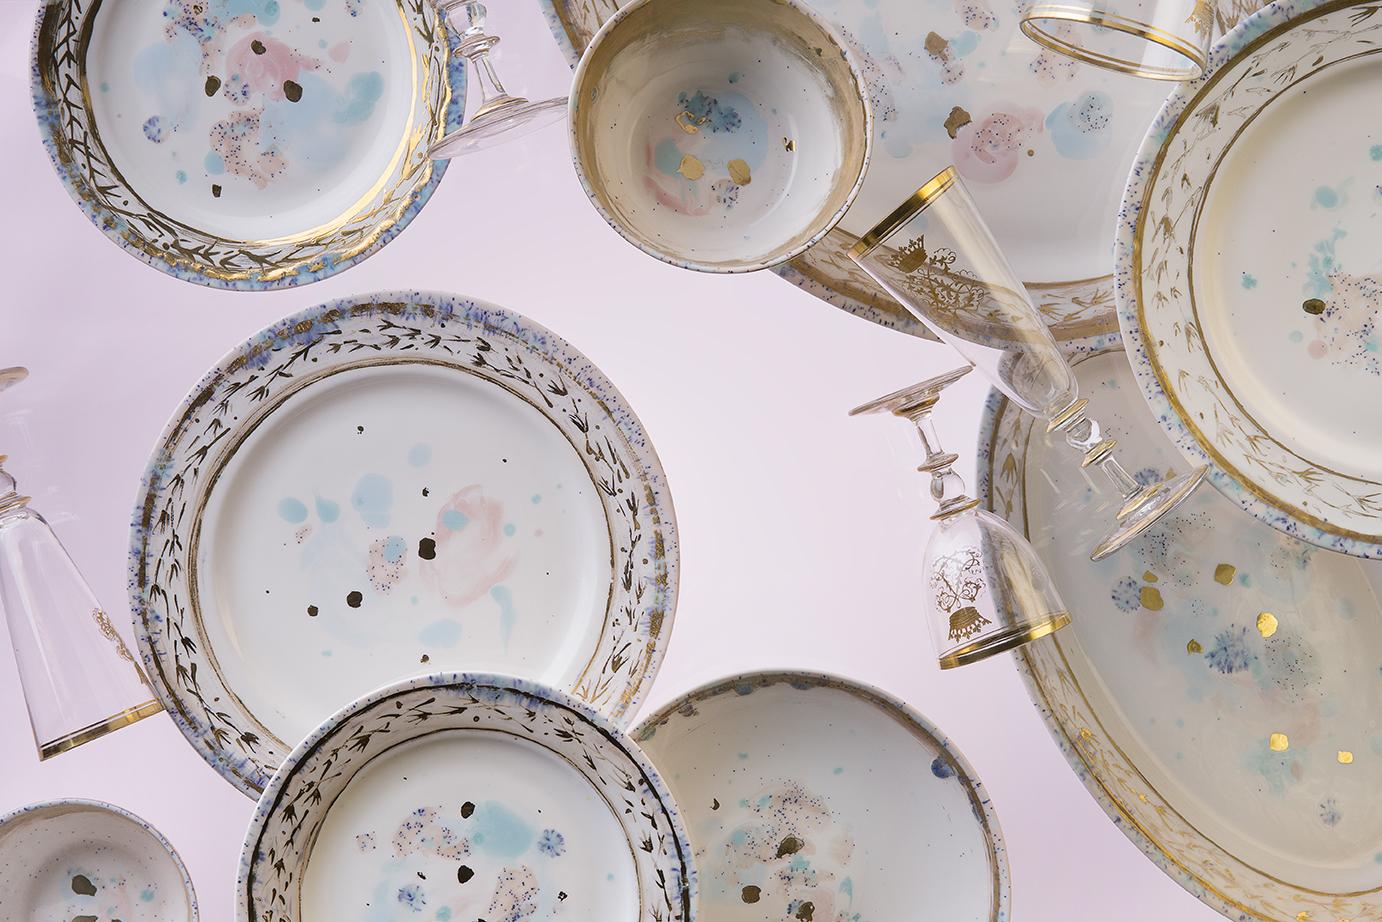 Hand painted in Italy from the finest porcelain, this Dafne Rim Charger has a narrow pink and blue dotted rim surrounding a broad, delicate golden decor of stylized flowers; subtle light blue and pink brushes sprinkled with black powder float on the